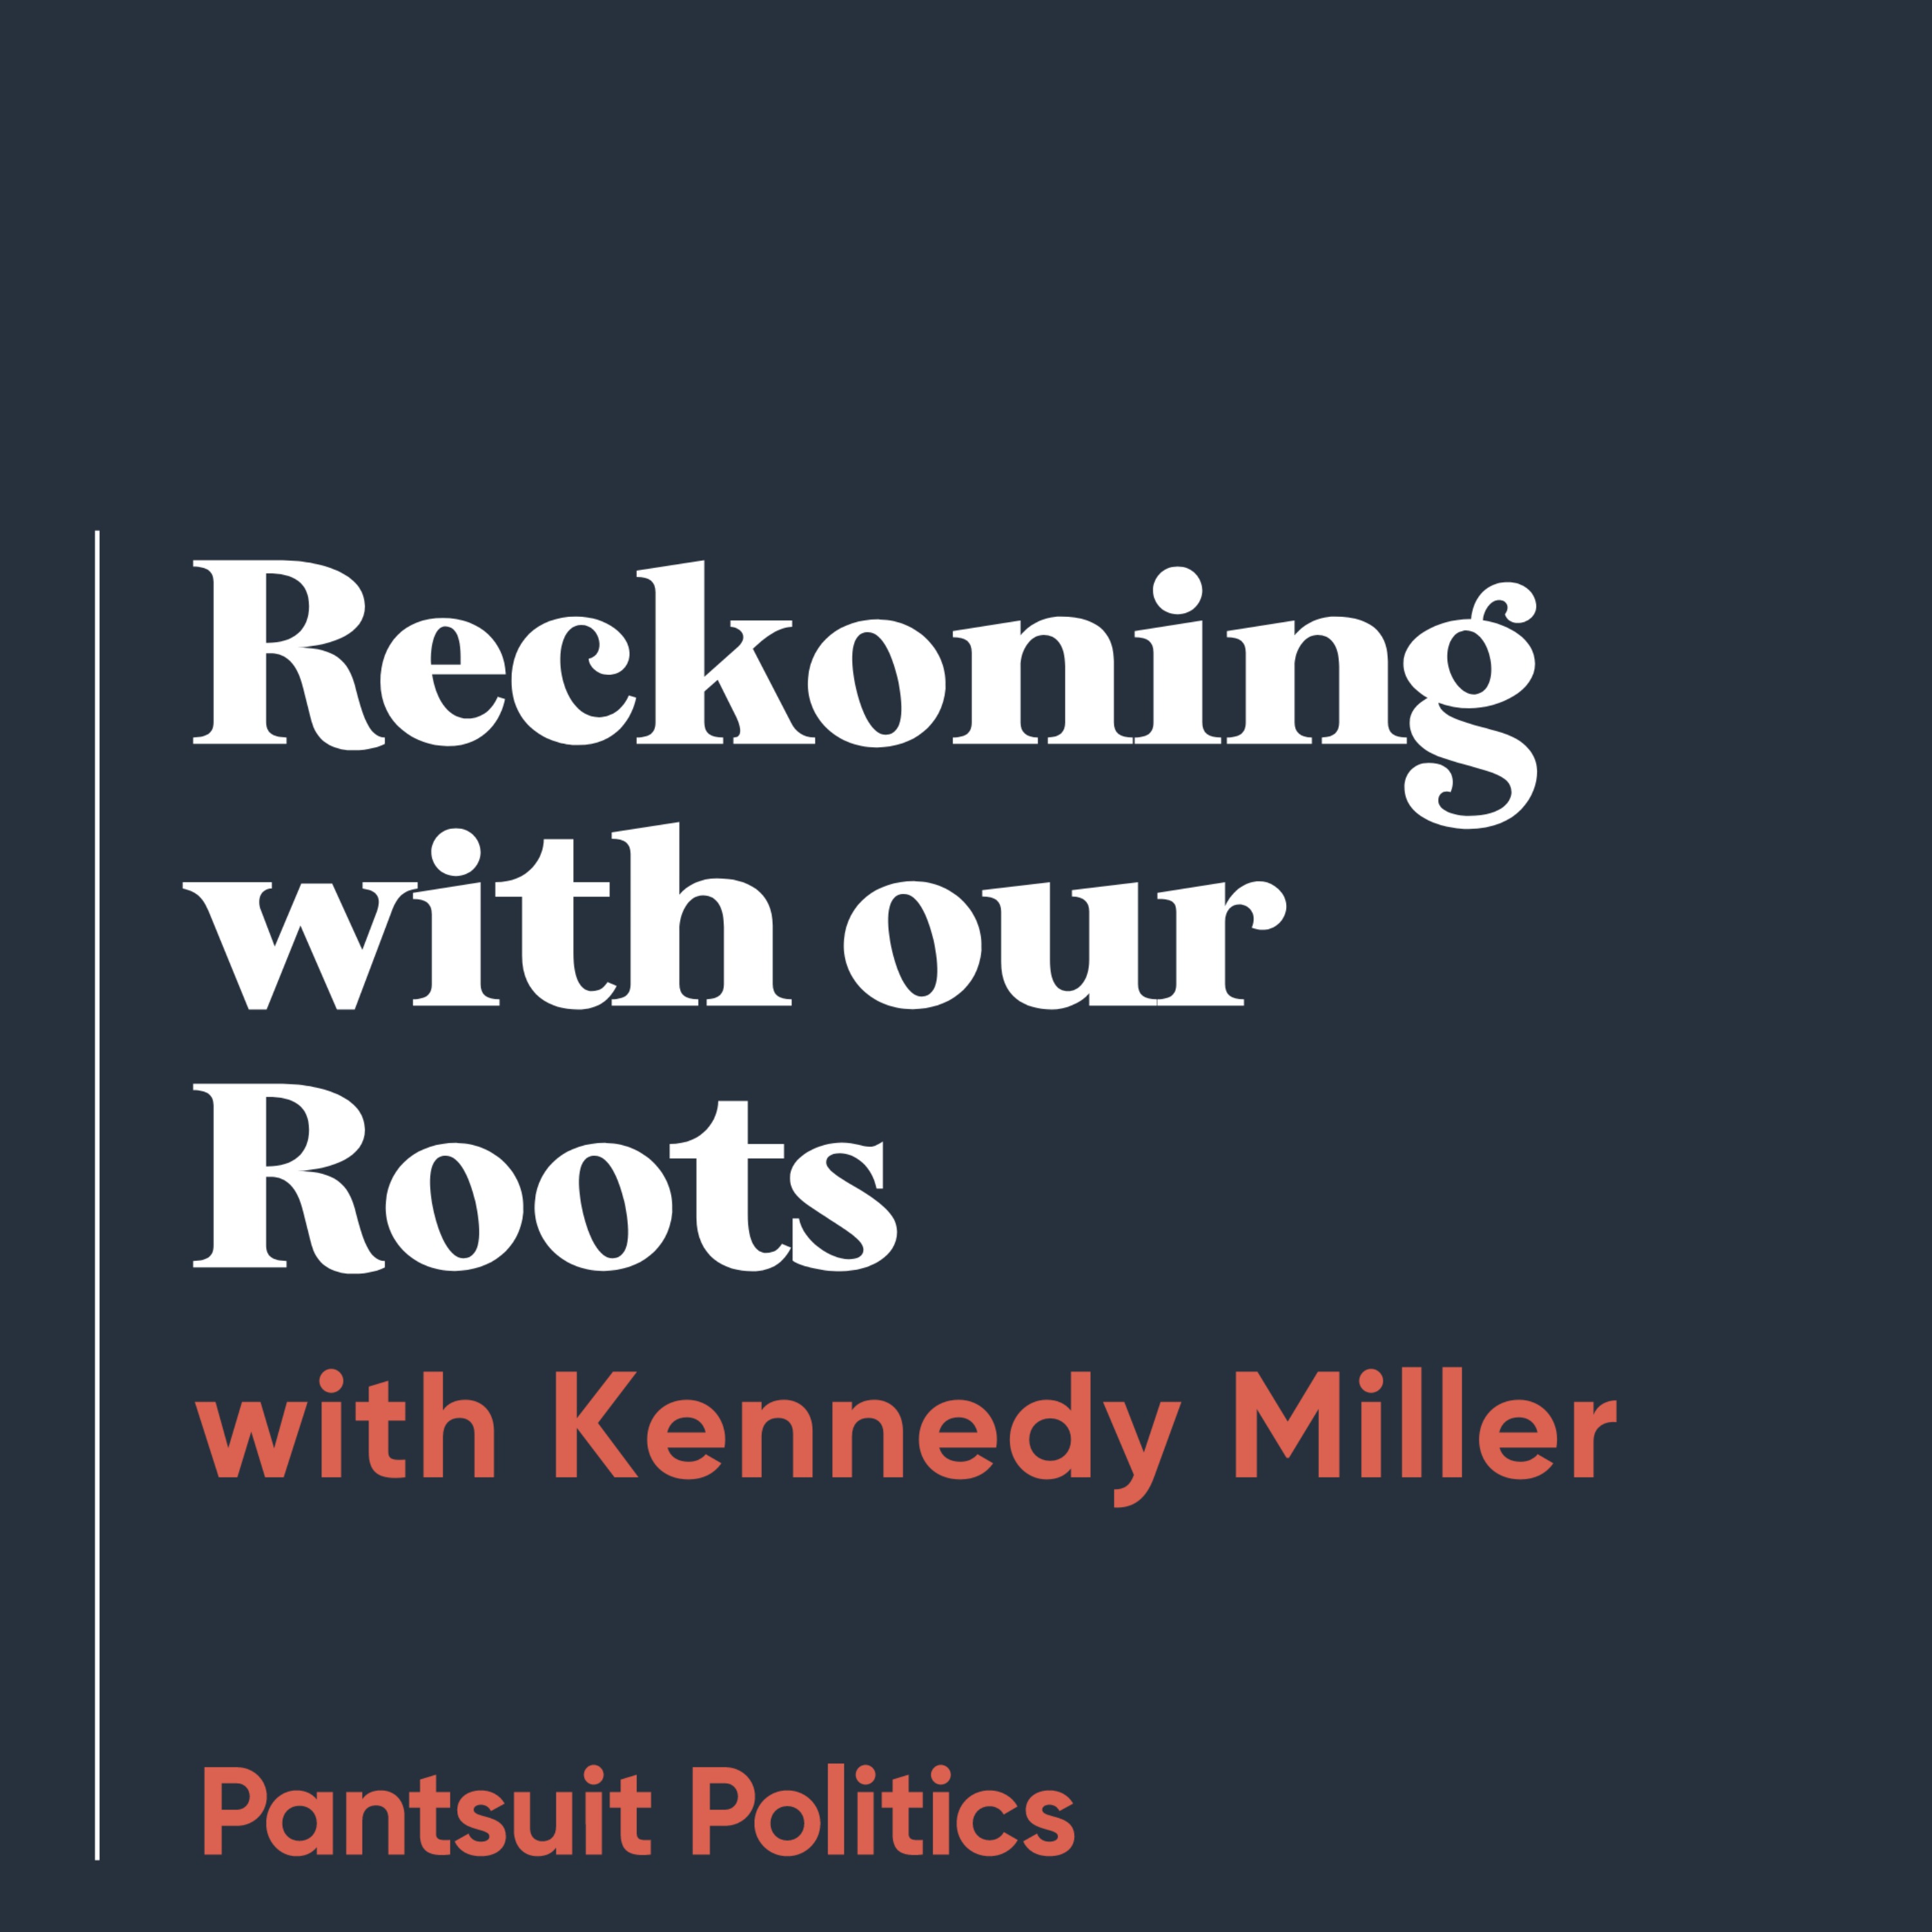 Reckoning with our Roots with Kennedy Miller